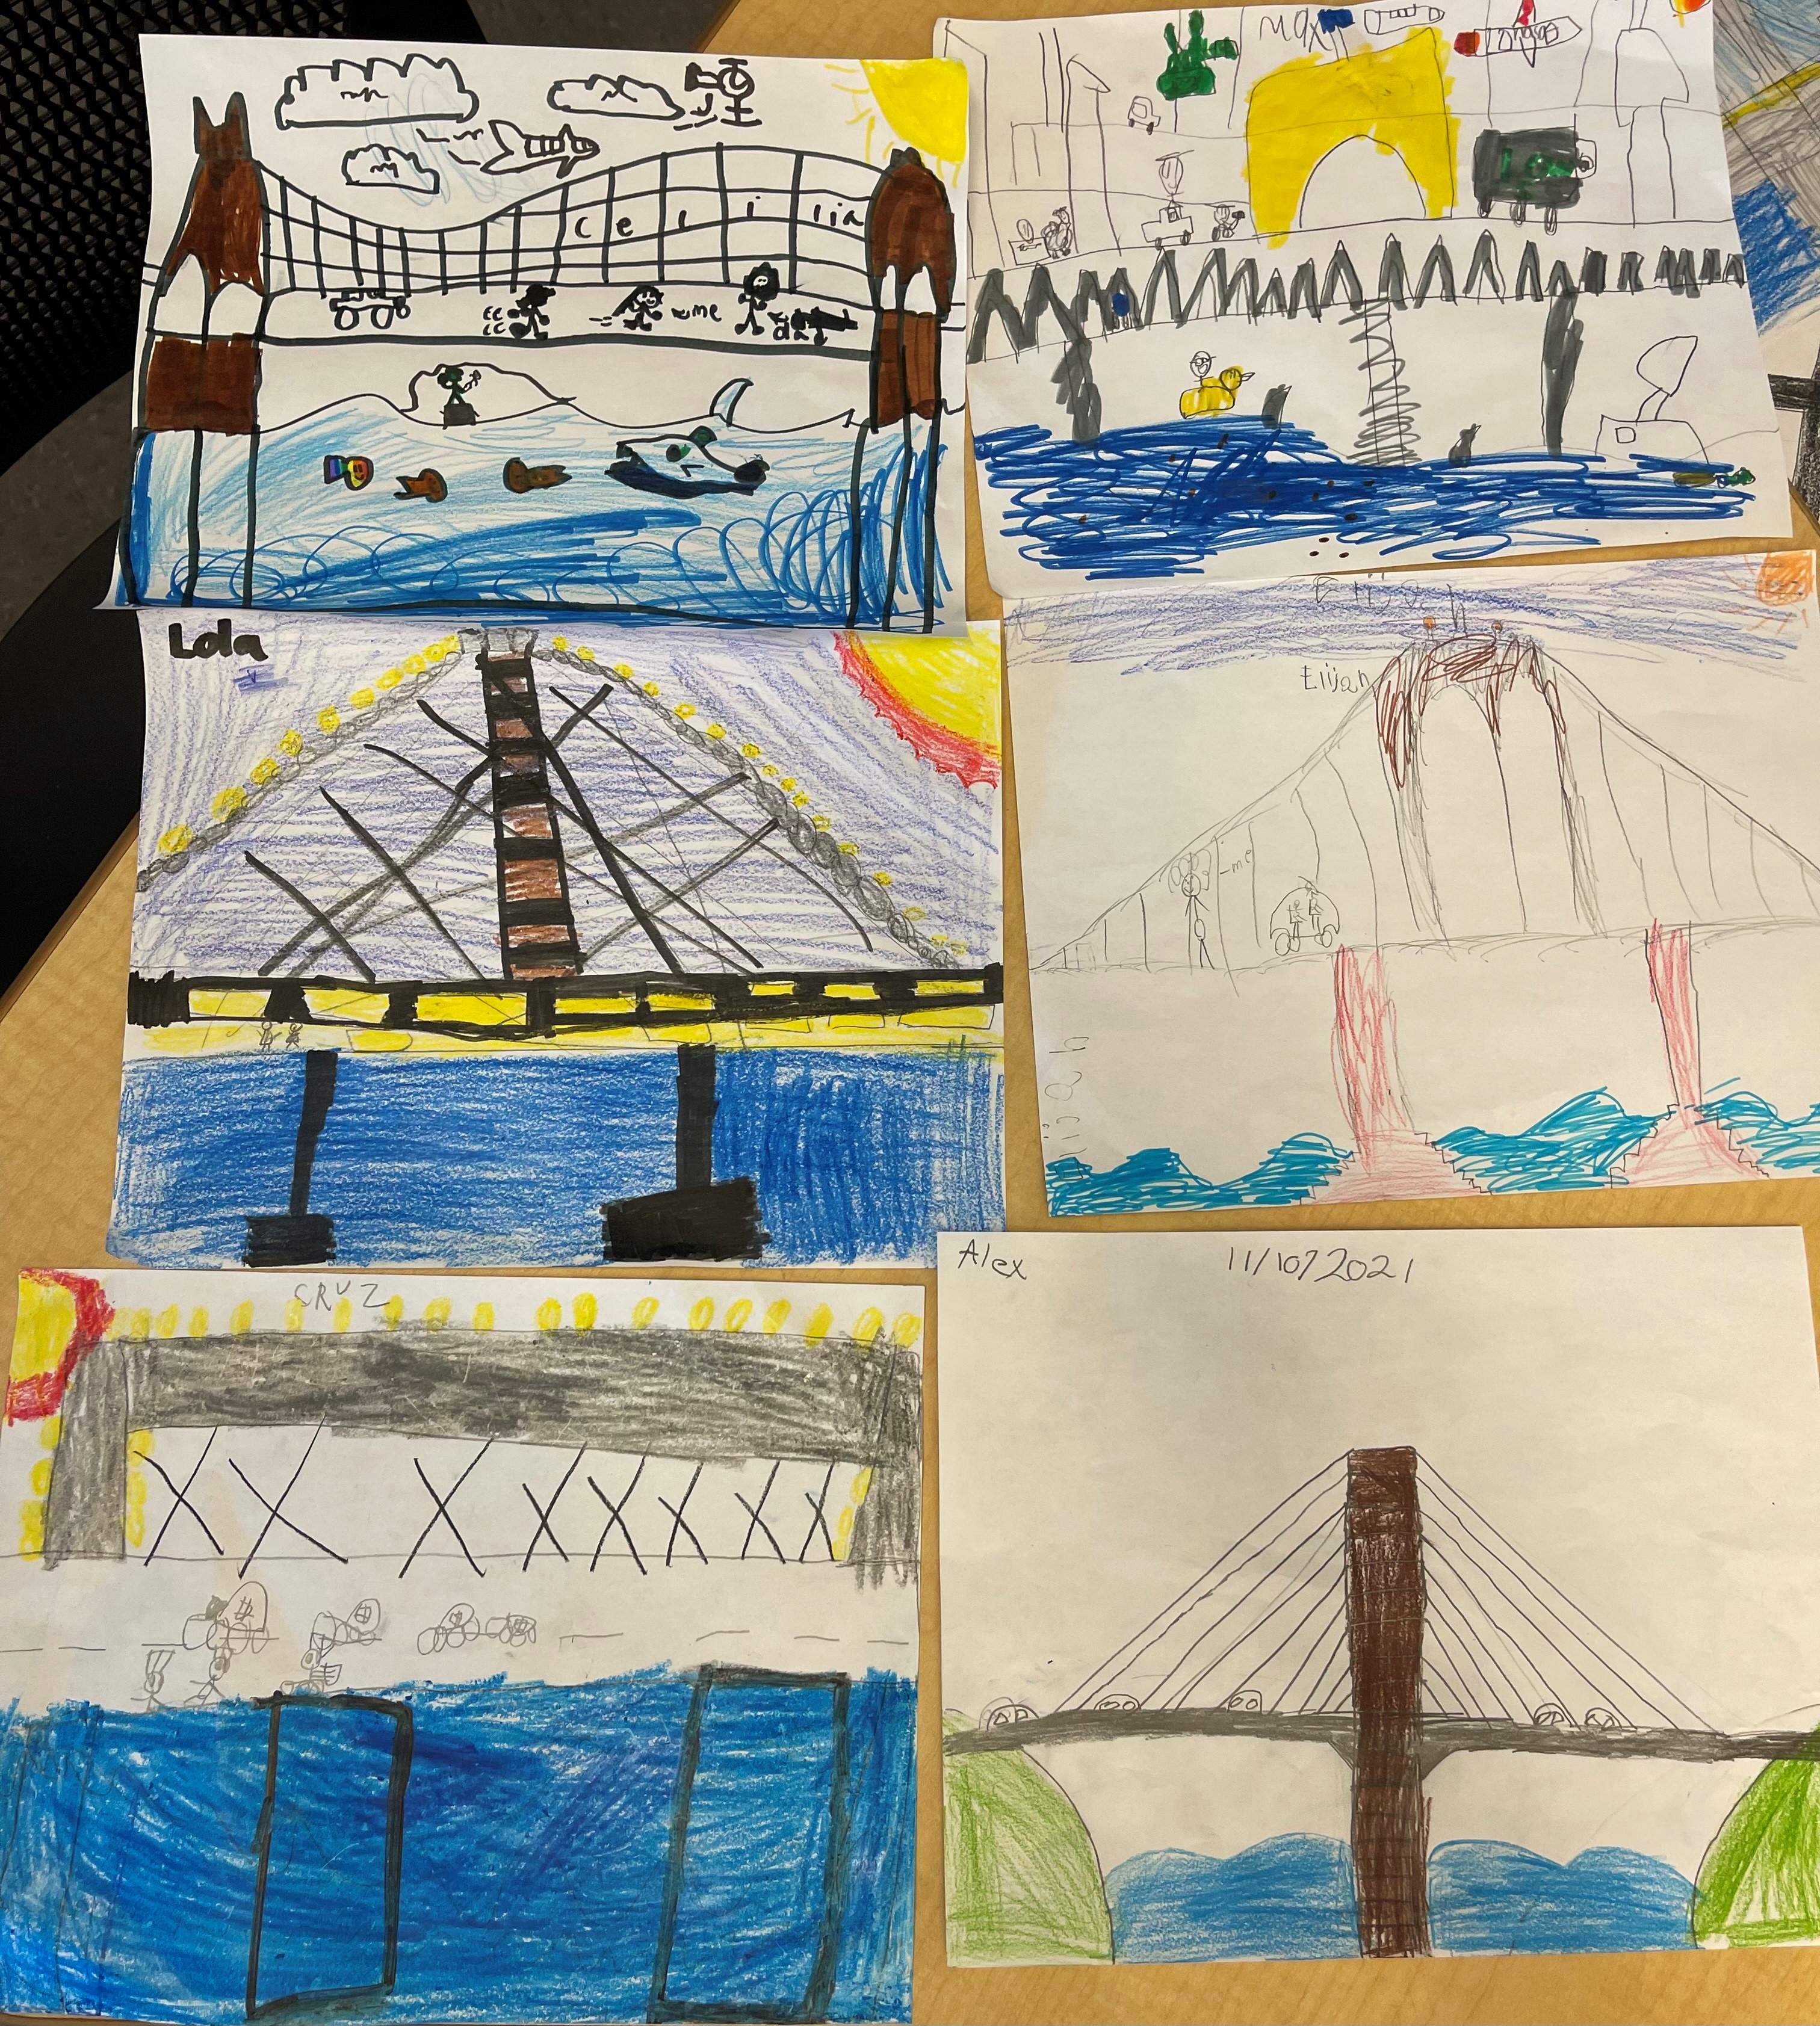 Children's drawings of the Brooklyn Bridge from a Ms. Pineda's class.